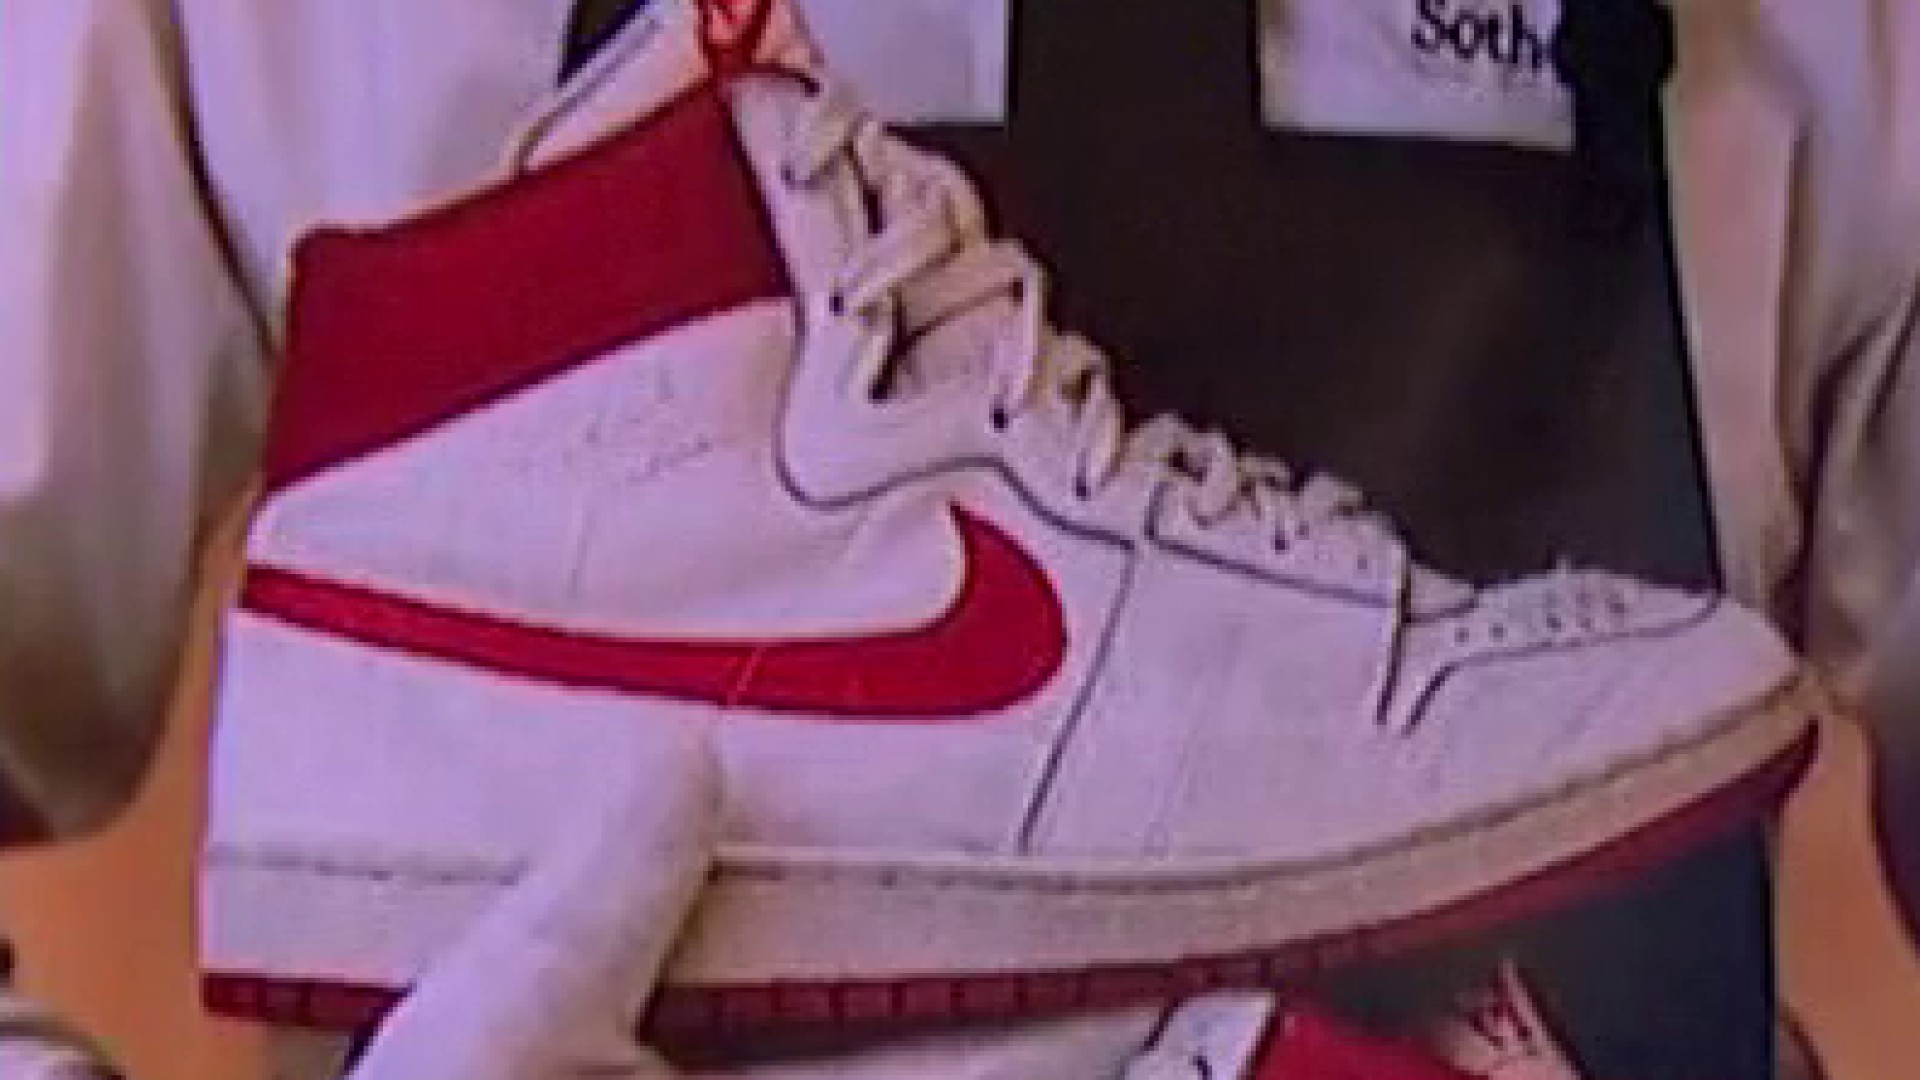 Michael Jordan's 1984 Nike Air Ships sell for record $1.5M at Sotheby's